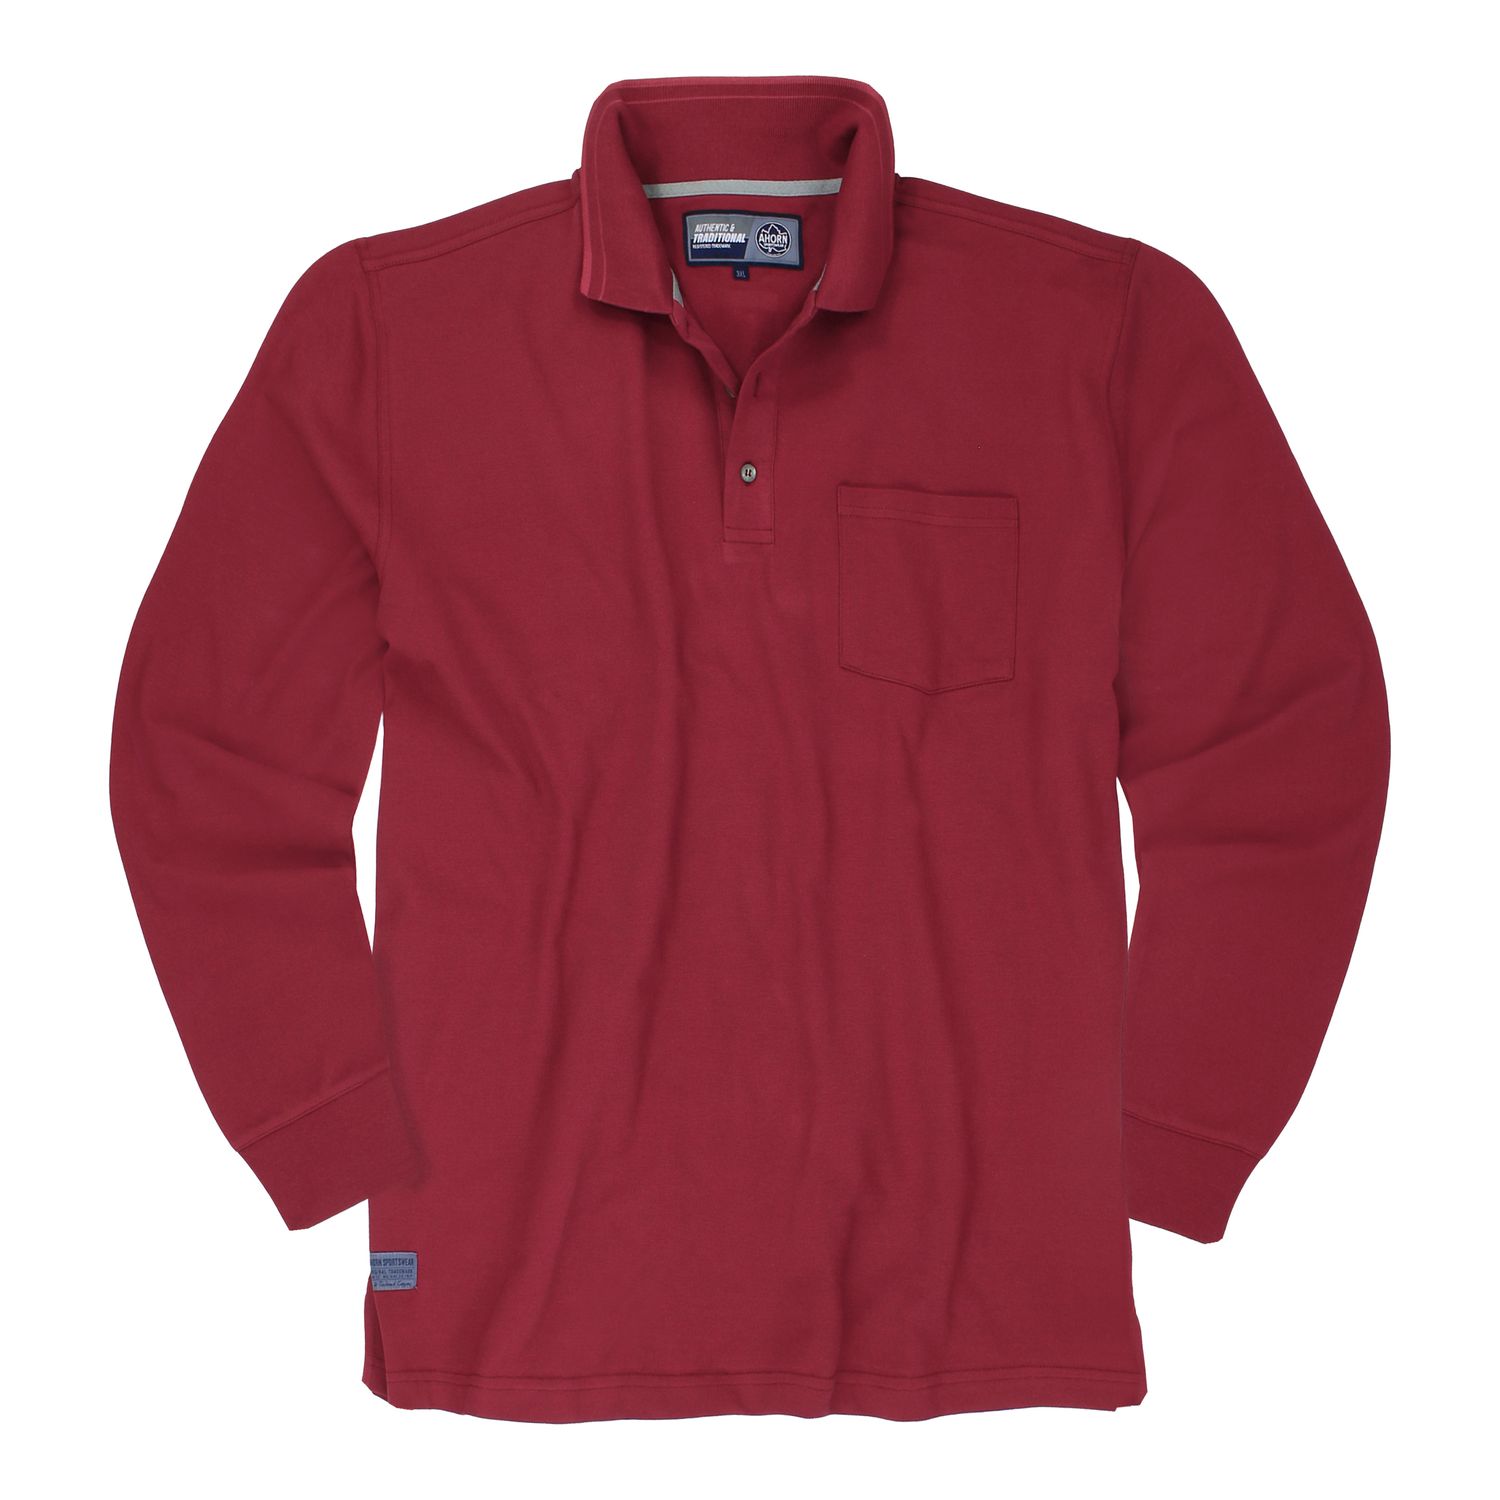 Longsleeve Polo "sky wolf" in dark red for men by Ahorn Sportswear up to oversize 10XL